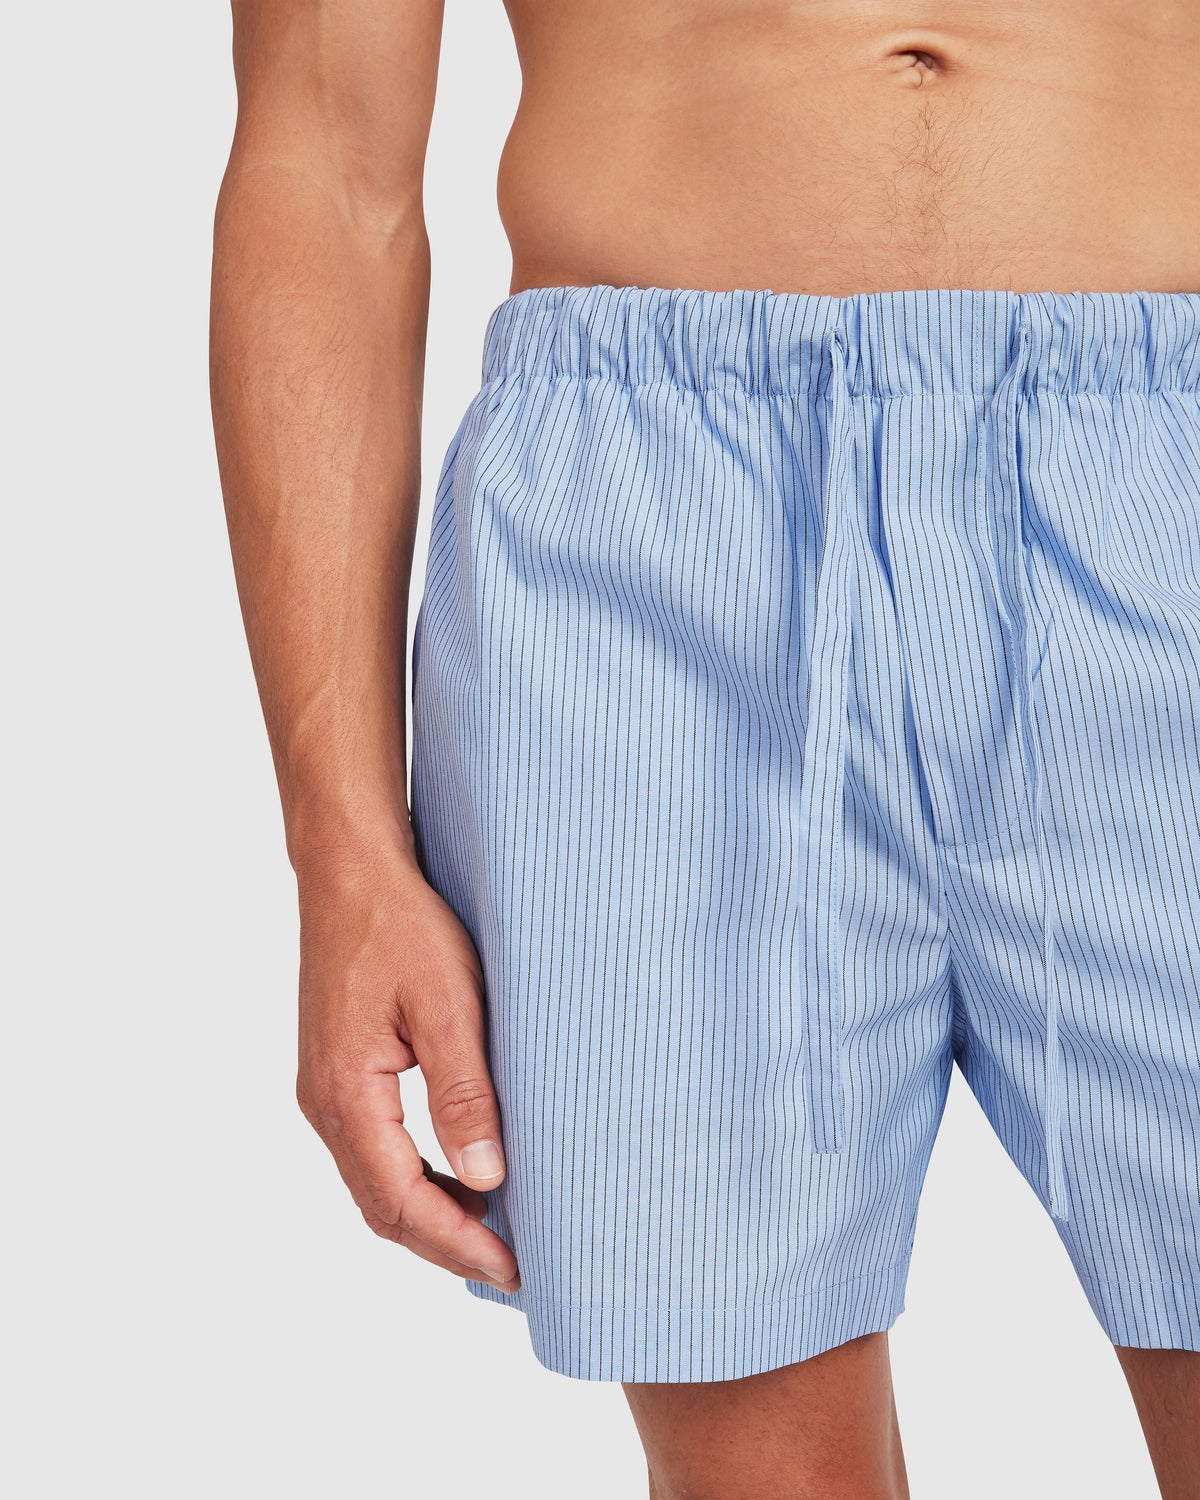 Load image into Gallery viewer, Unisex Euro Cotton Shorts - Placid Blue Black Stripe
